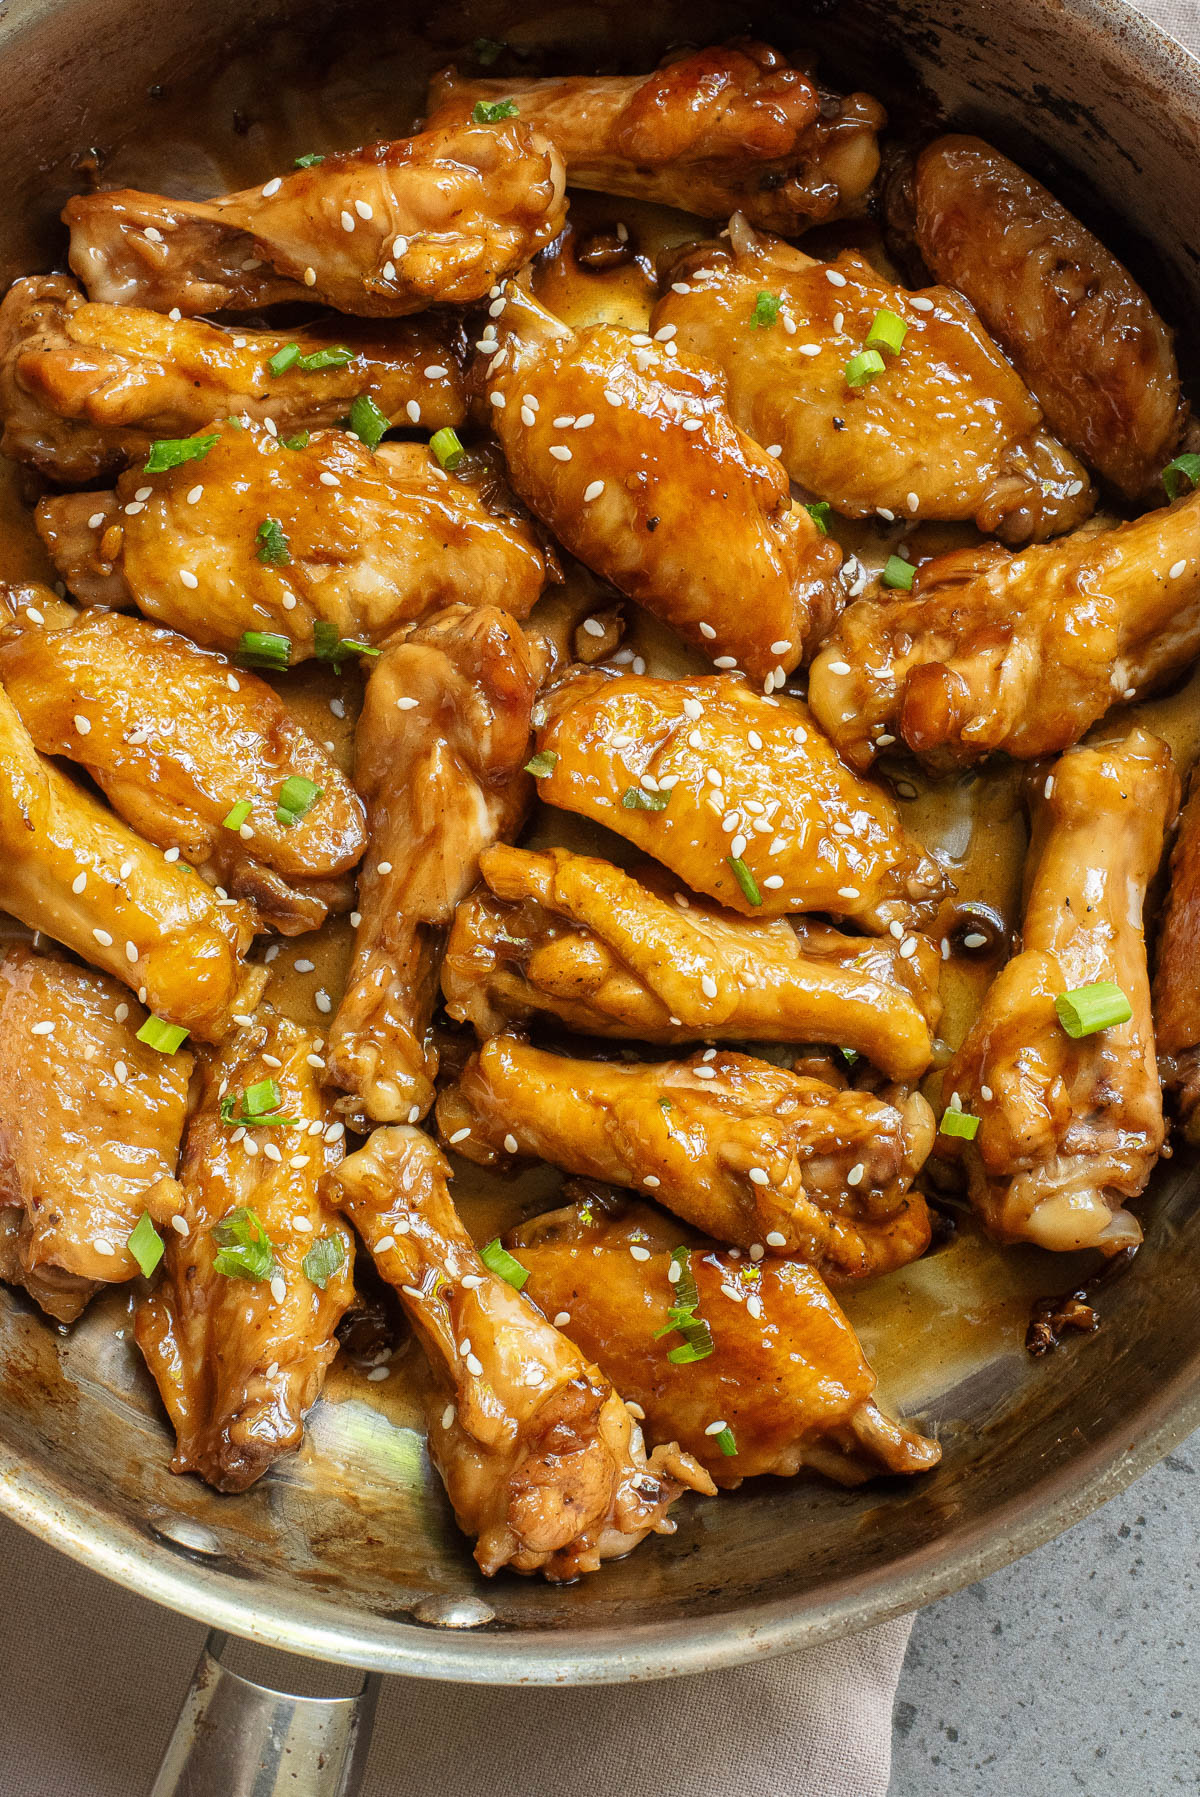 Chicken wings in sauce in a skillet.